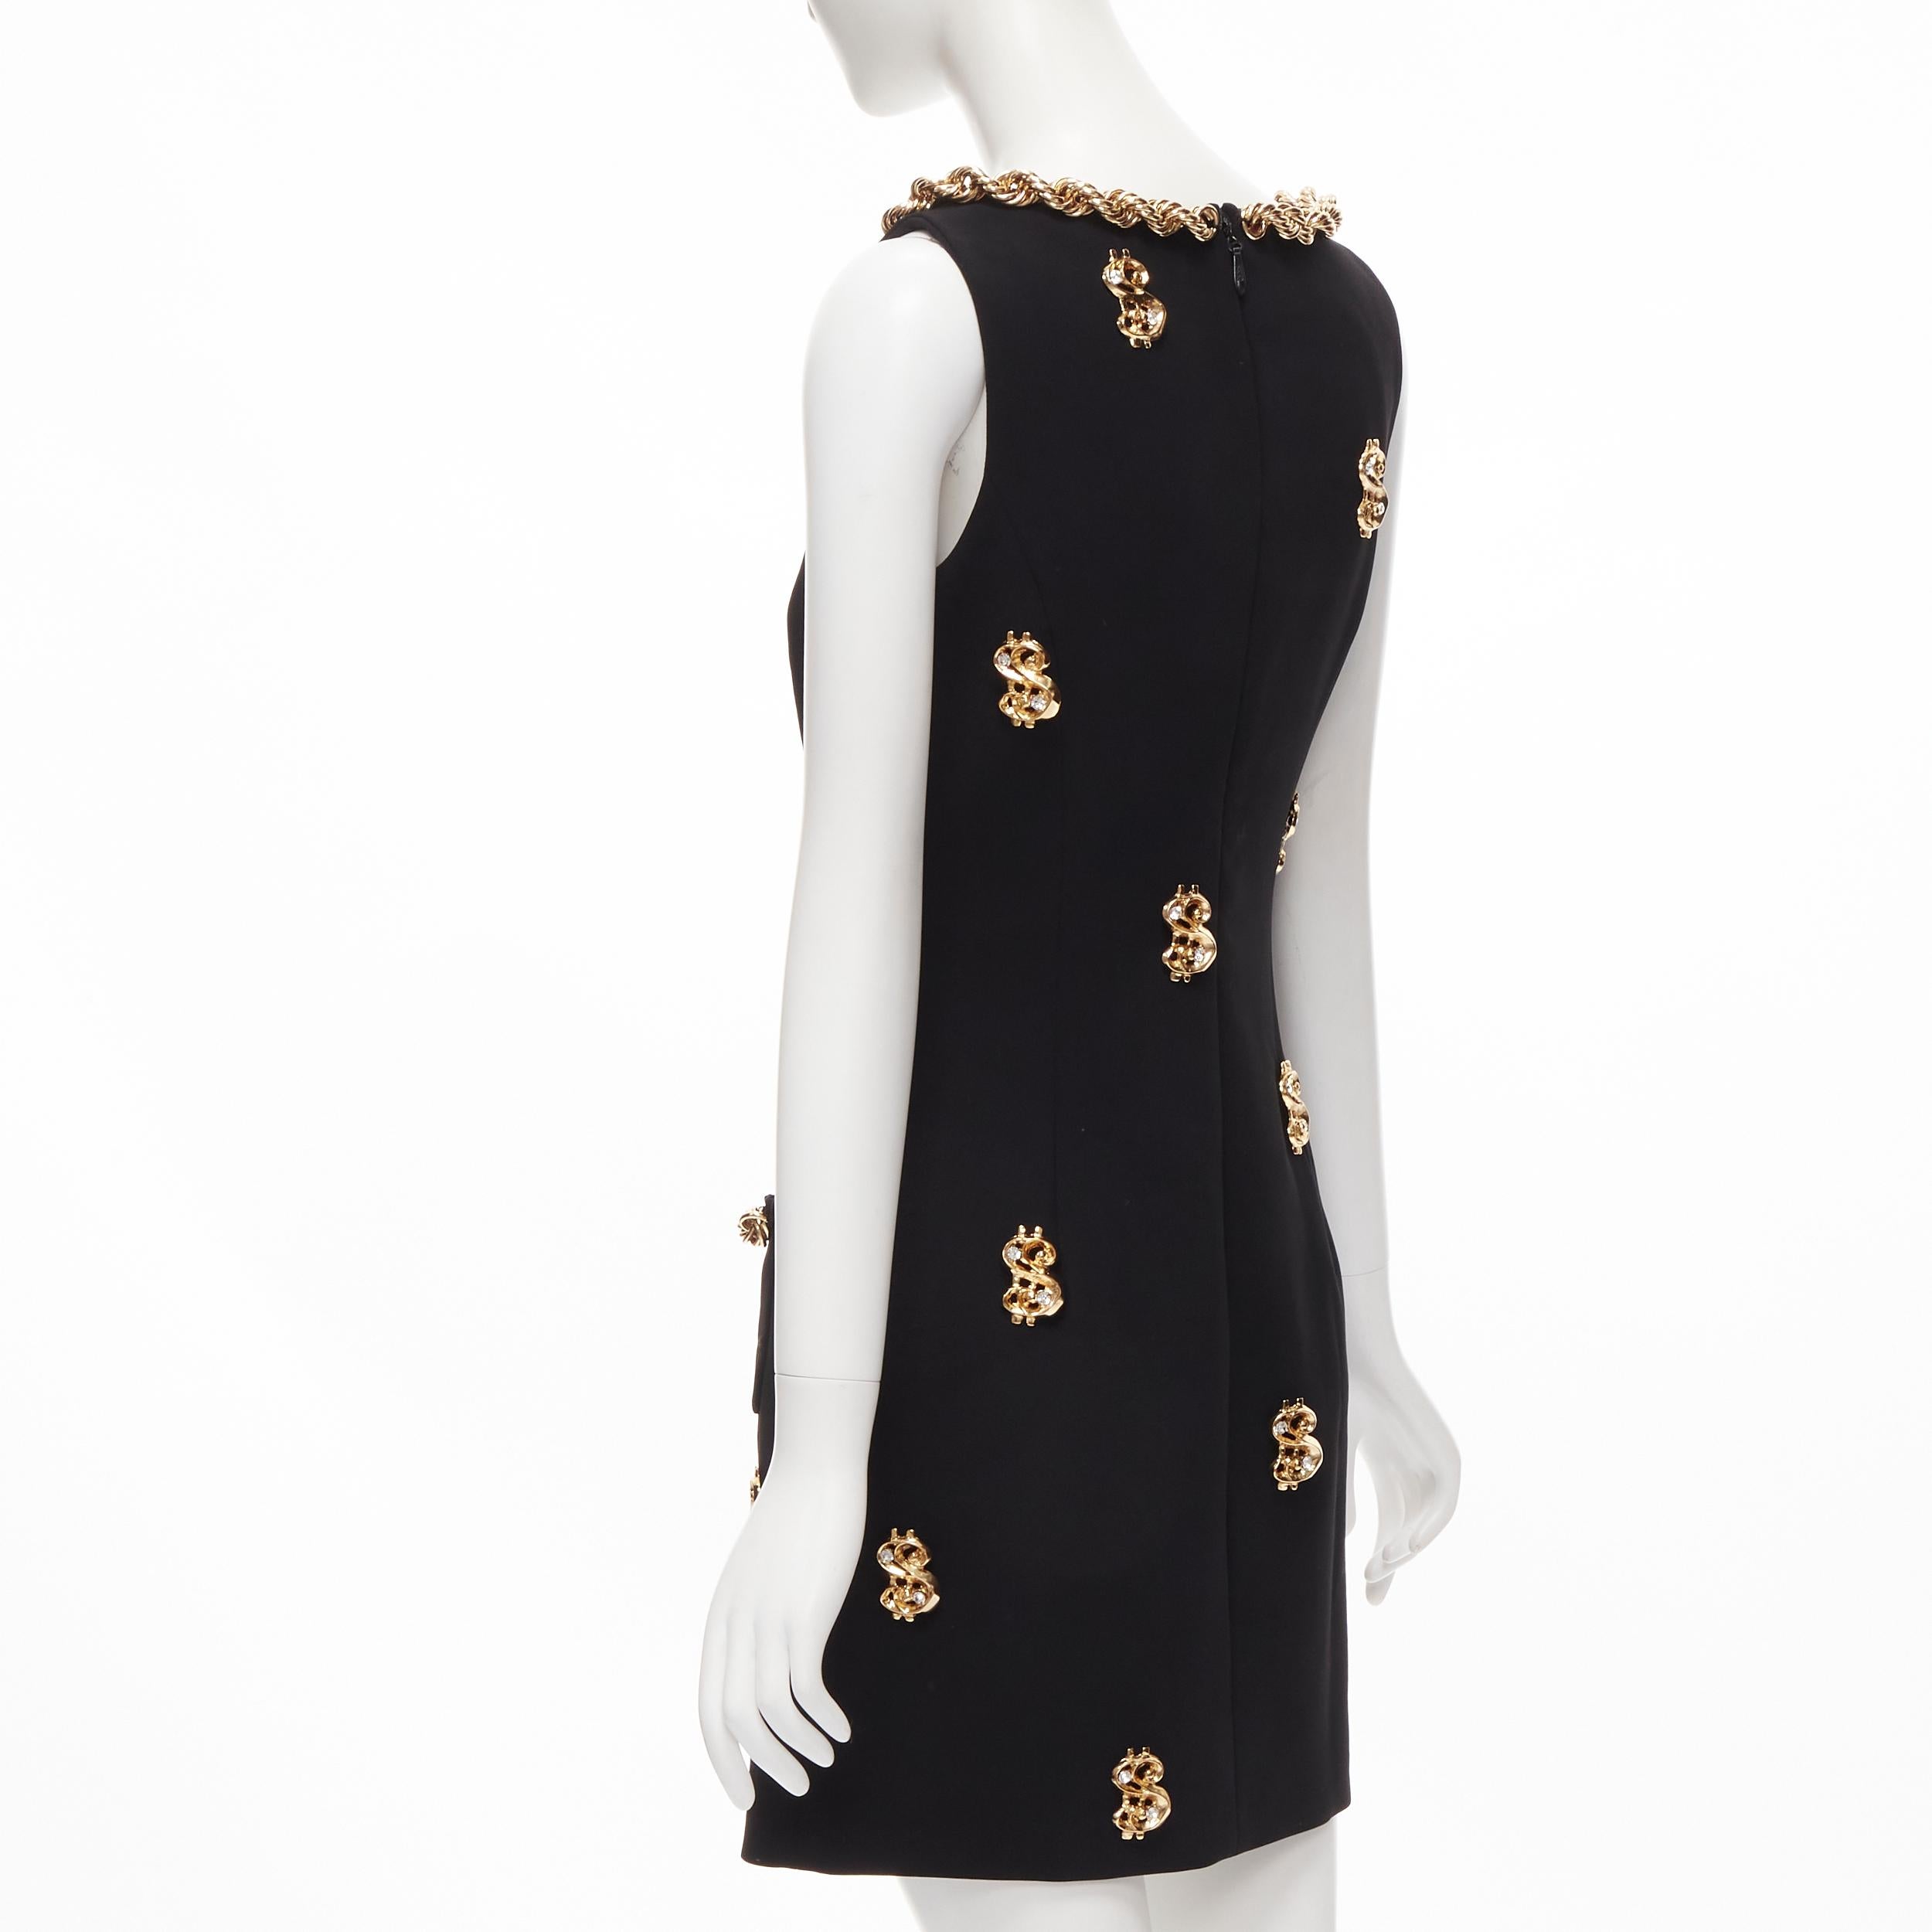 Black new MOSCHINO Couture! 2019 Runway gold crystal dollar sign dress Kylie IT40 S